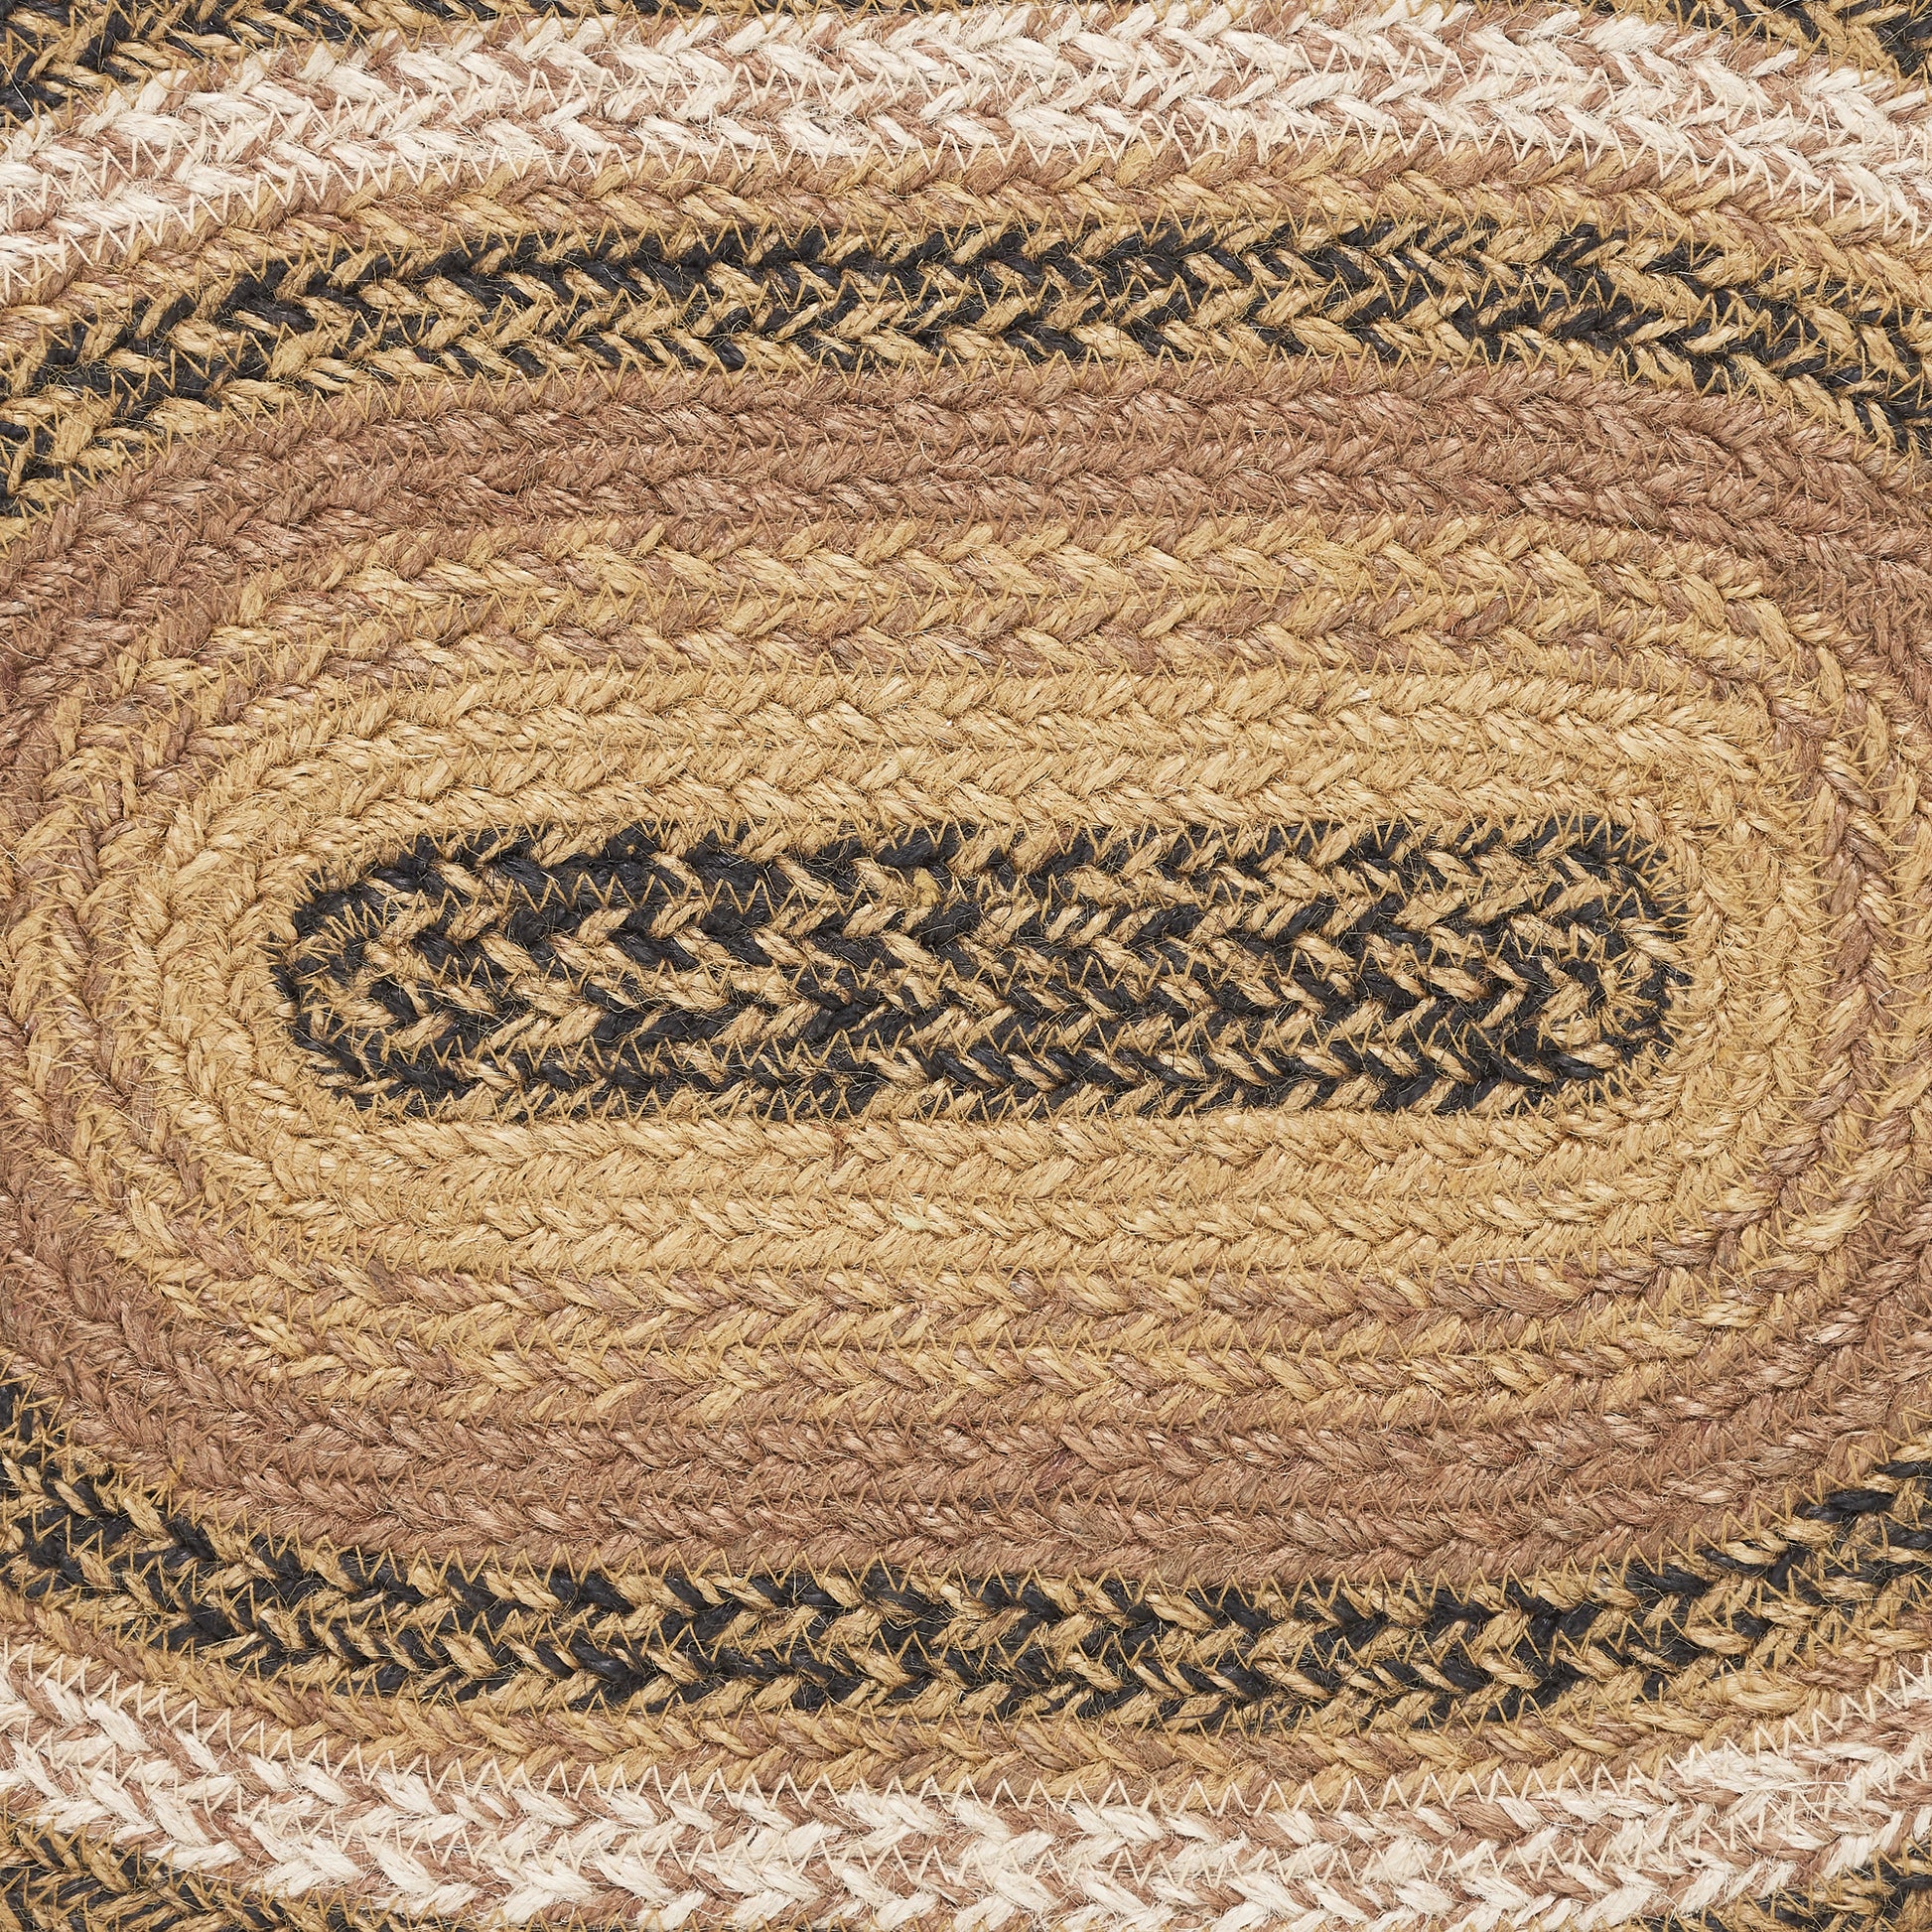 81386-Kettle-Grove-Jute-Oval-Placemat-10x15-image-3